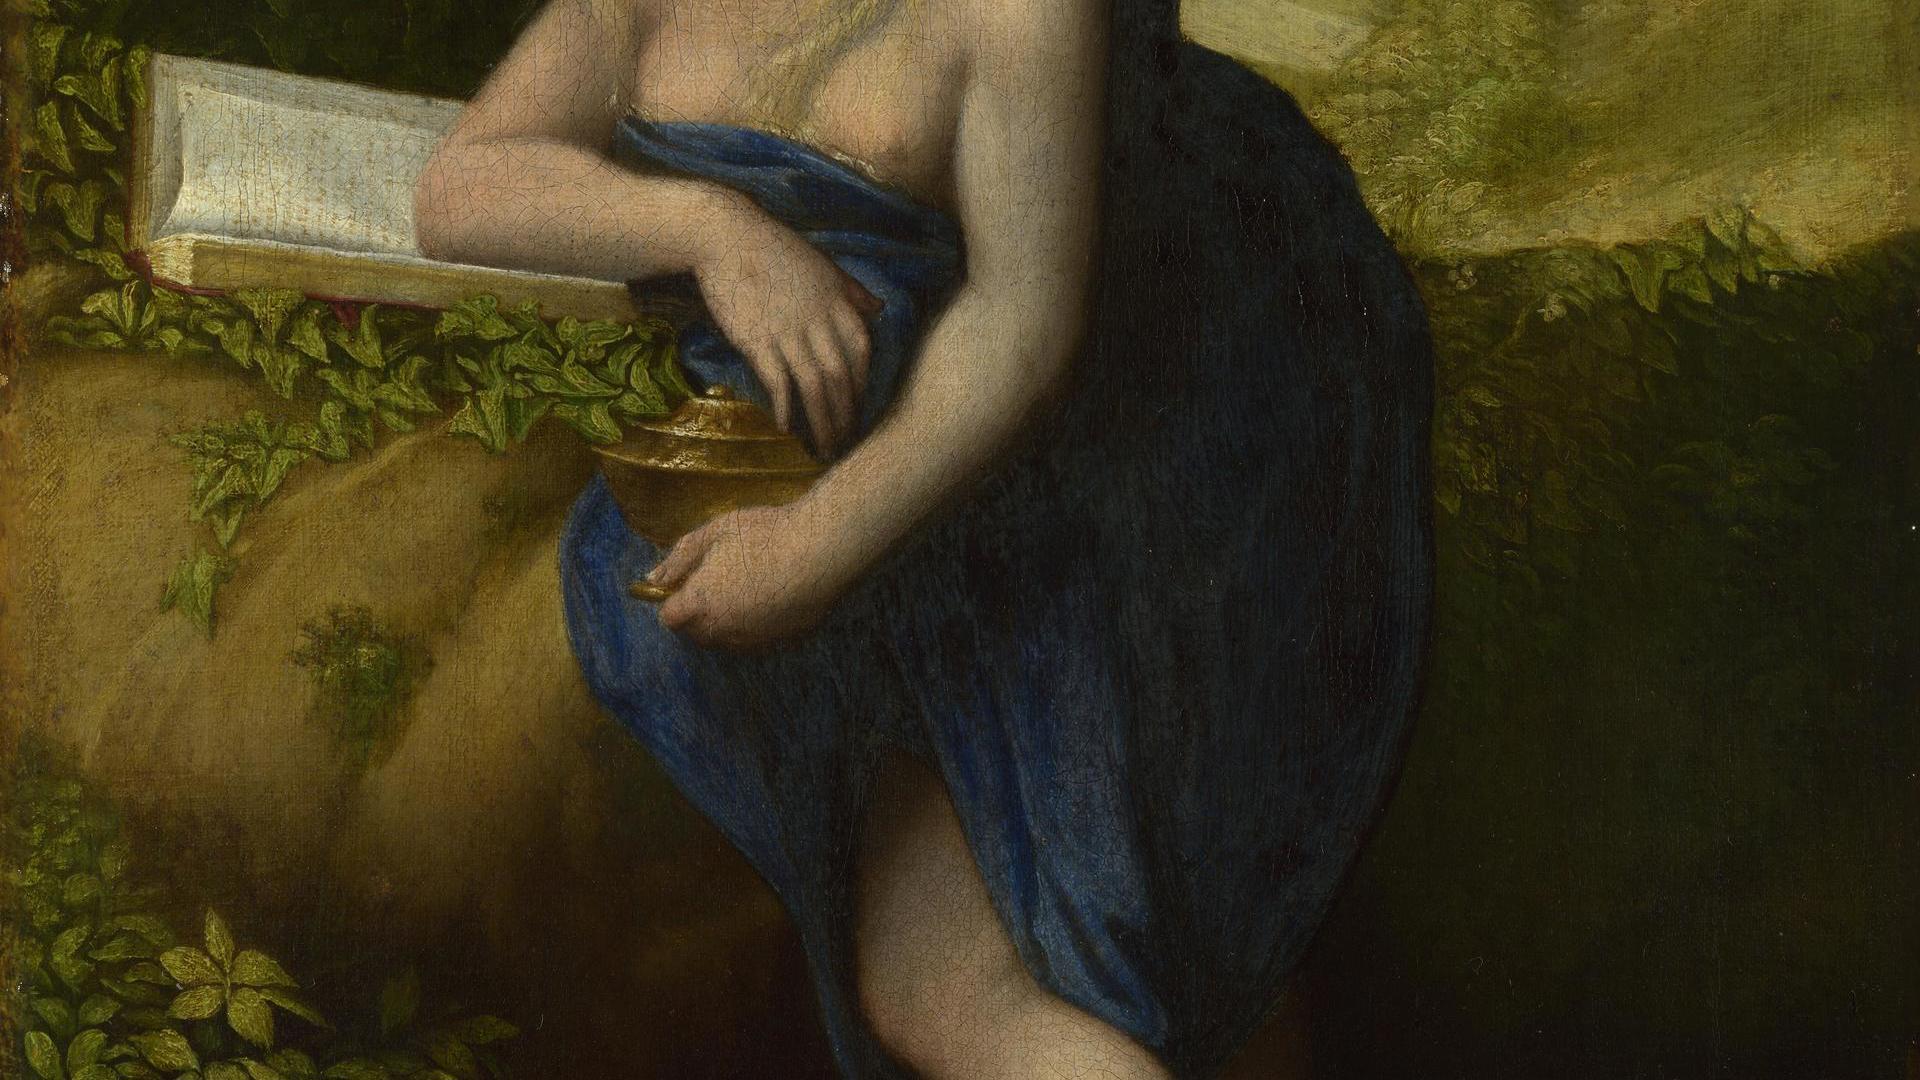 The Magdalen by Probably by Correggio